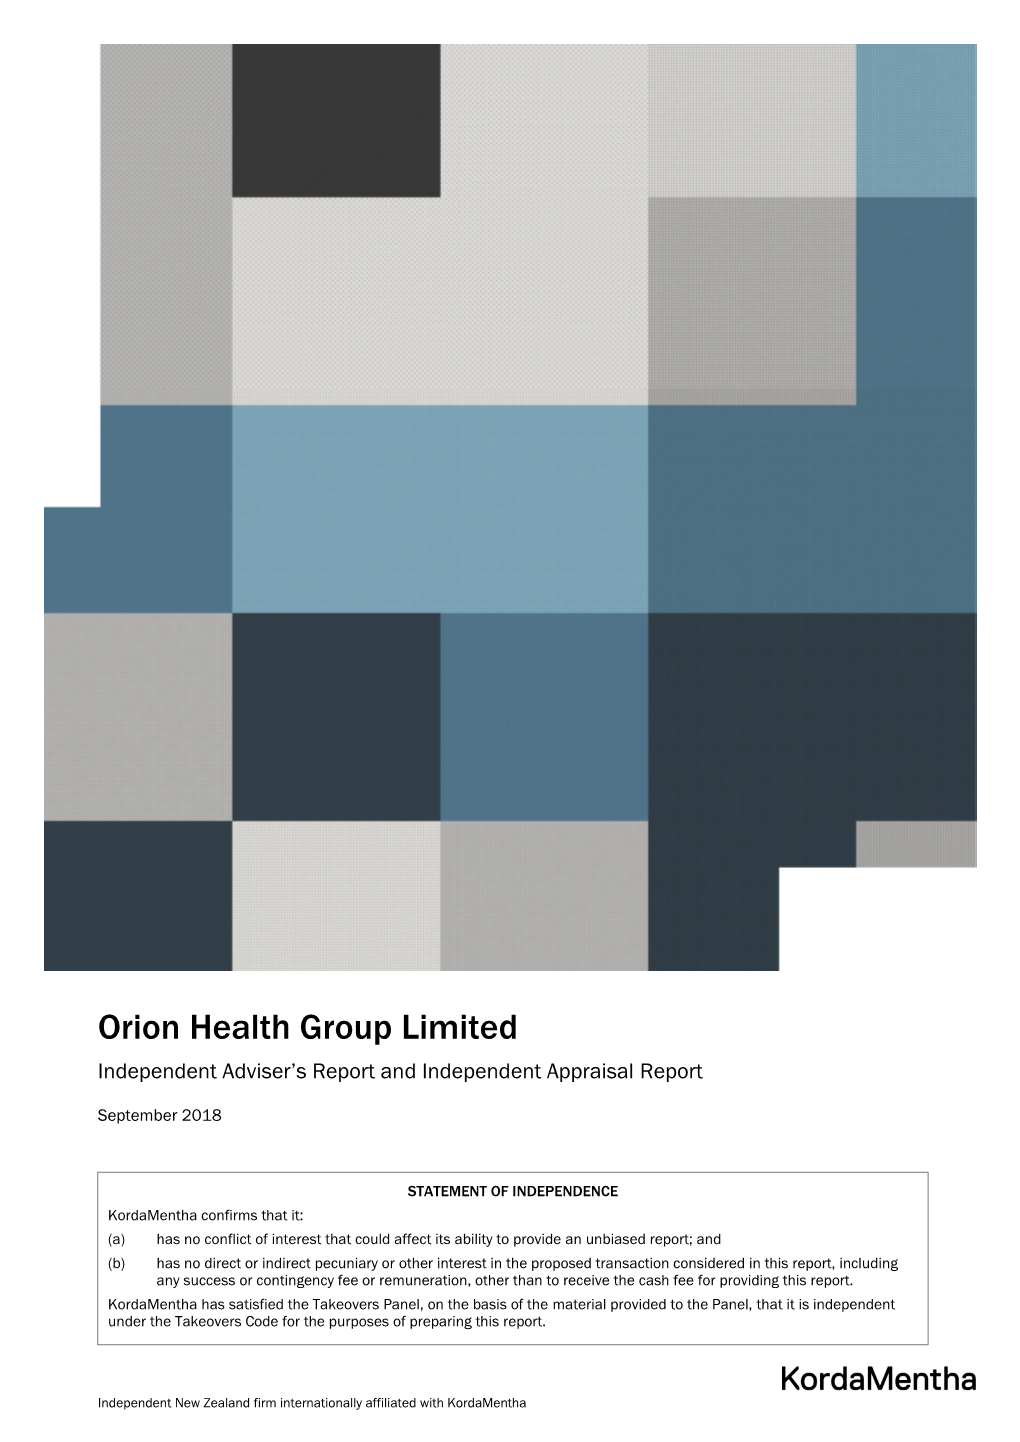 Orion Health Group Limited Independent Adviser’S Report and Independent Appraisal Report